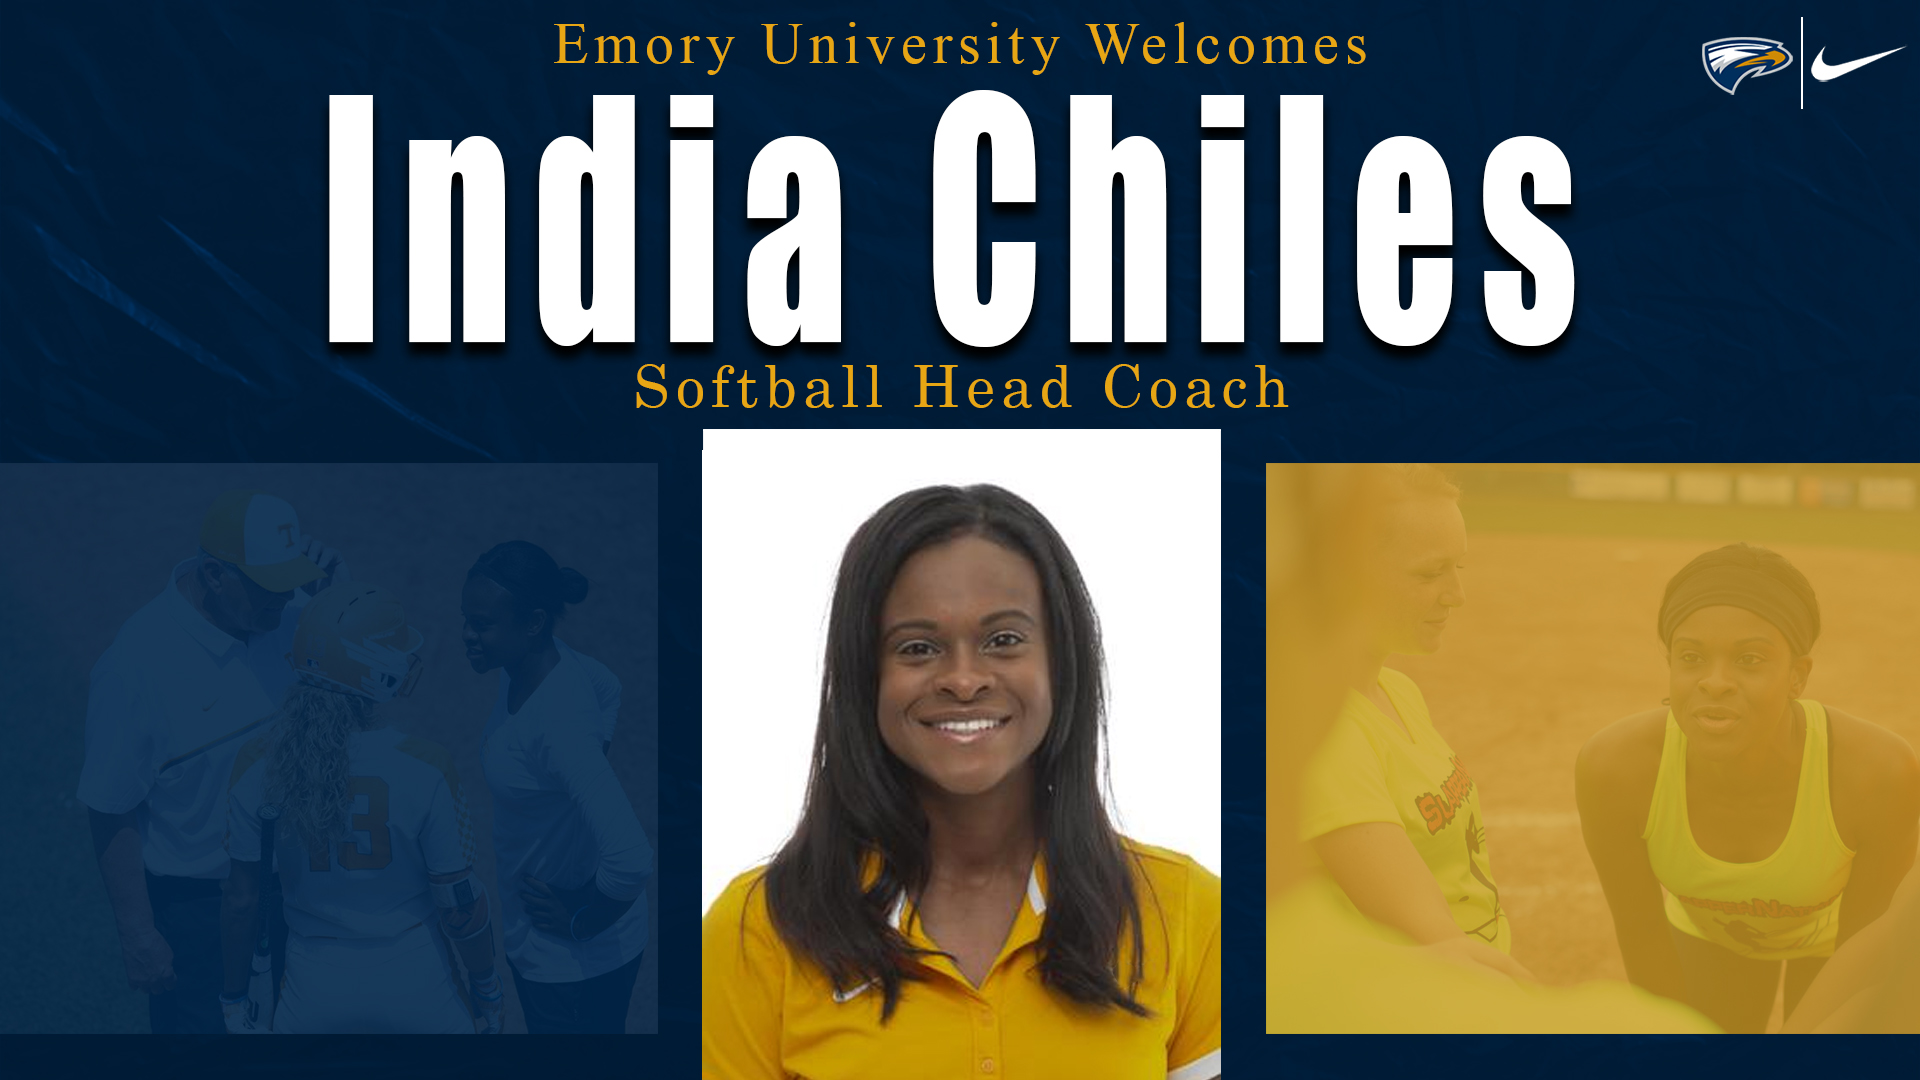 India Chiles Named Head Coach for Emory Softball